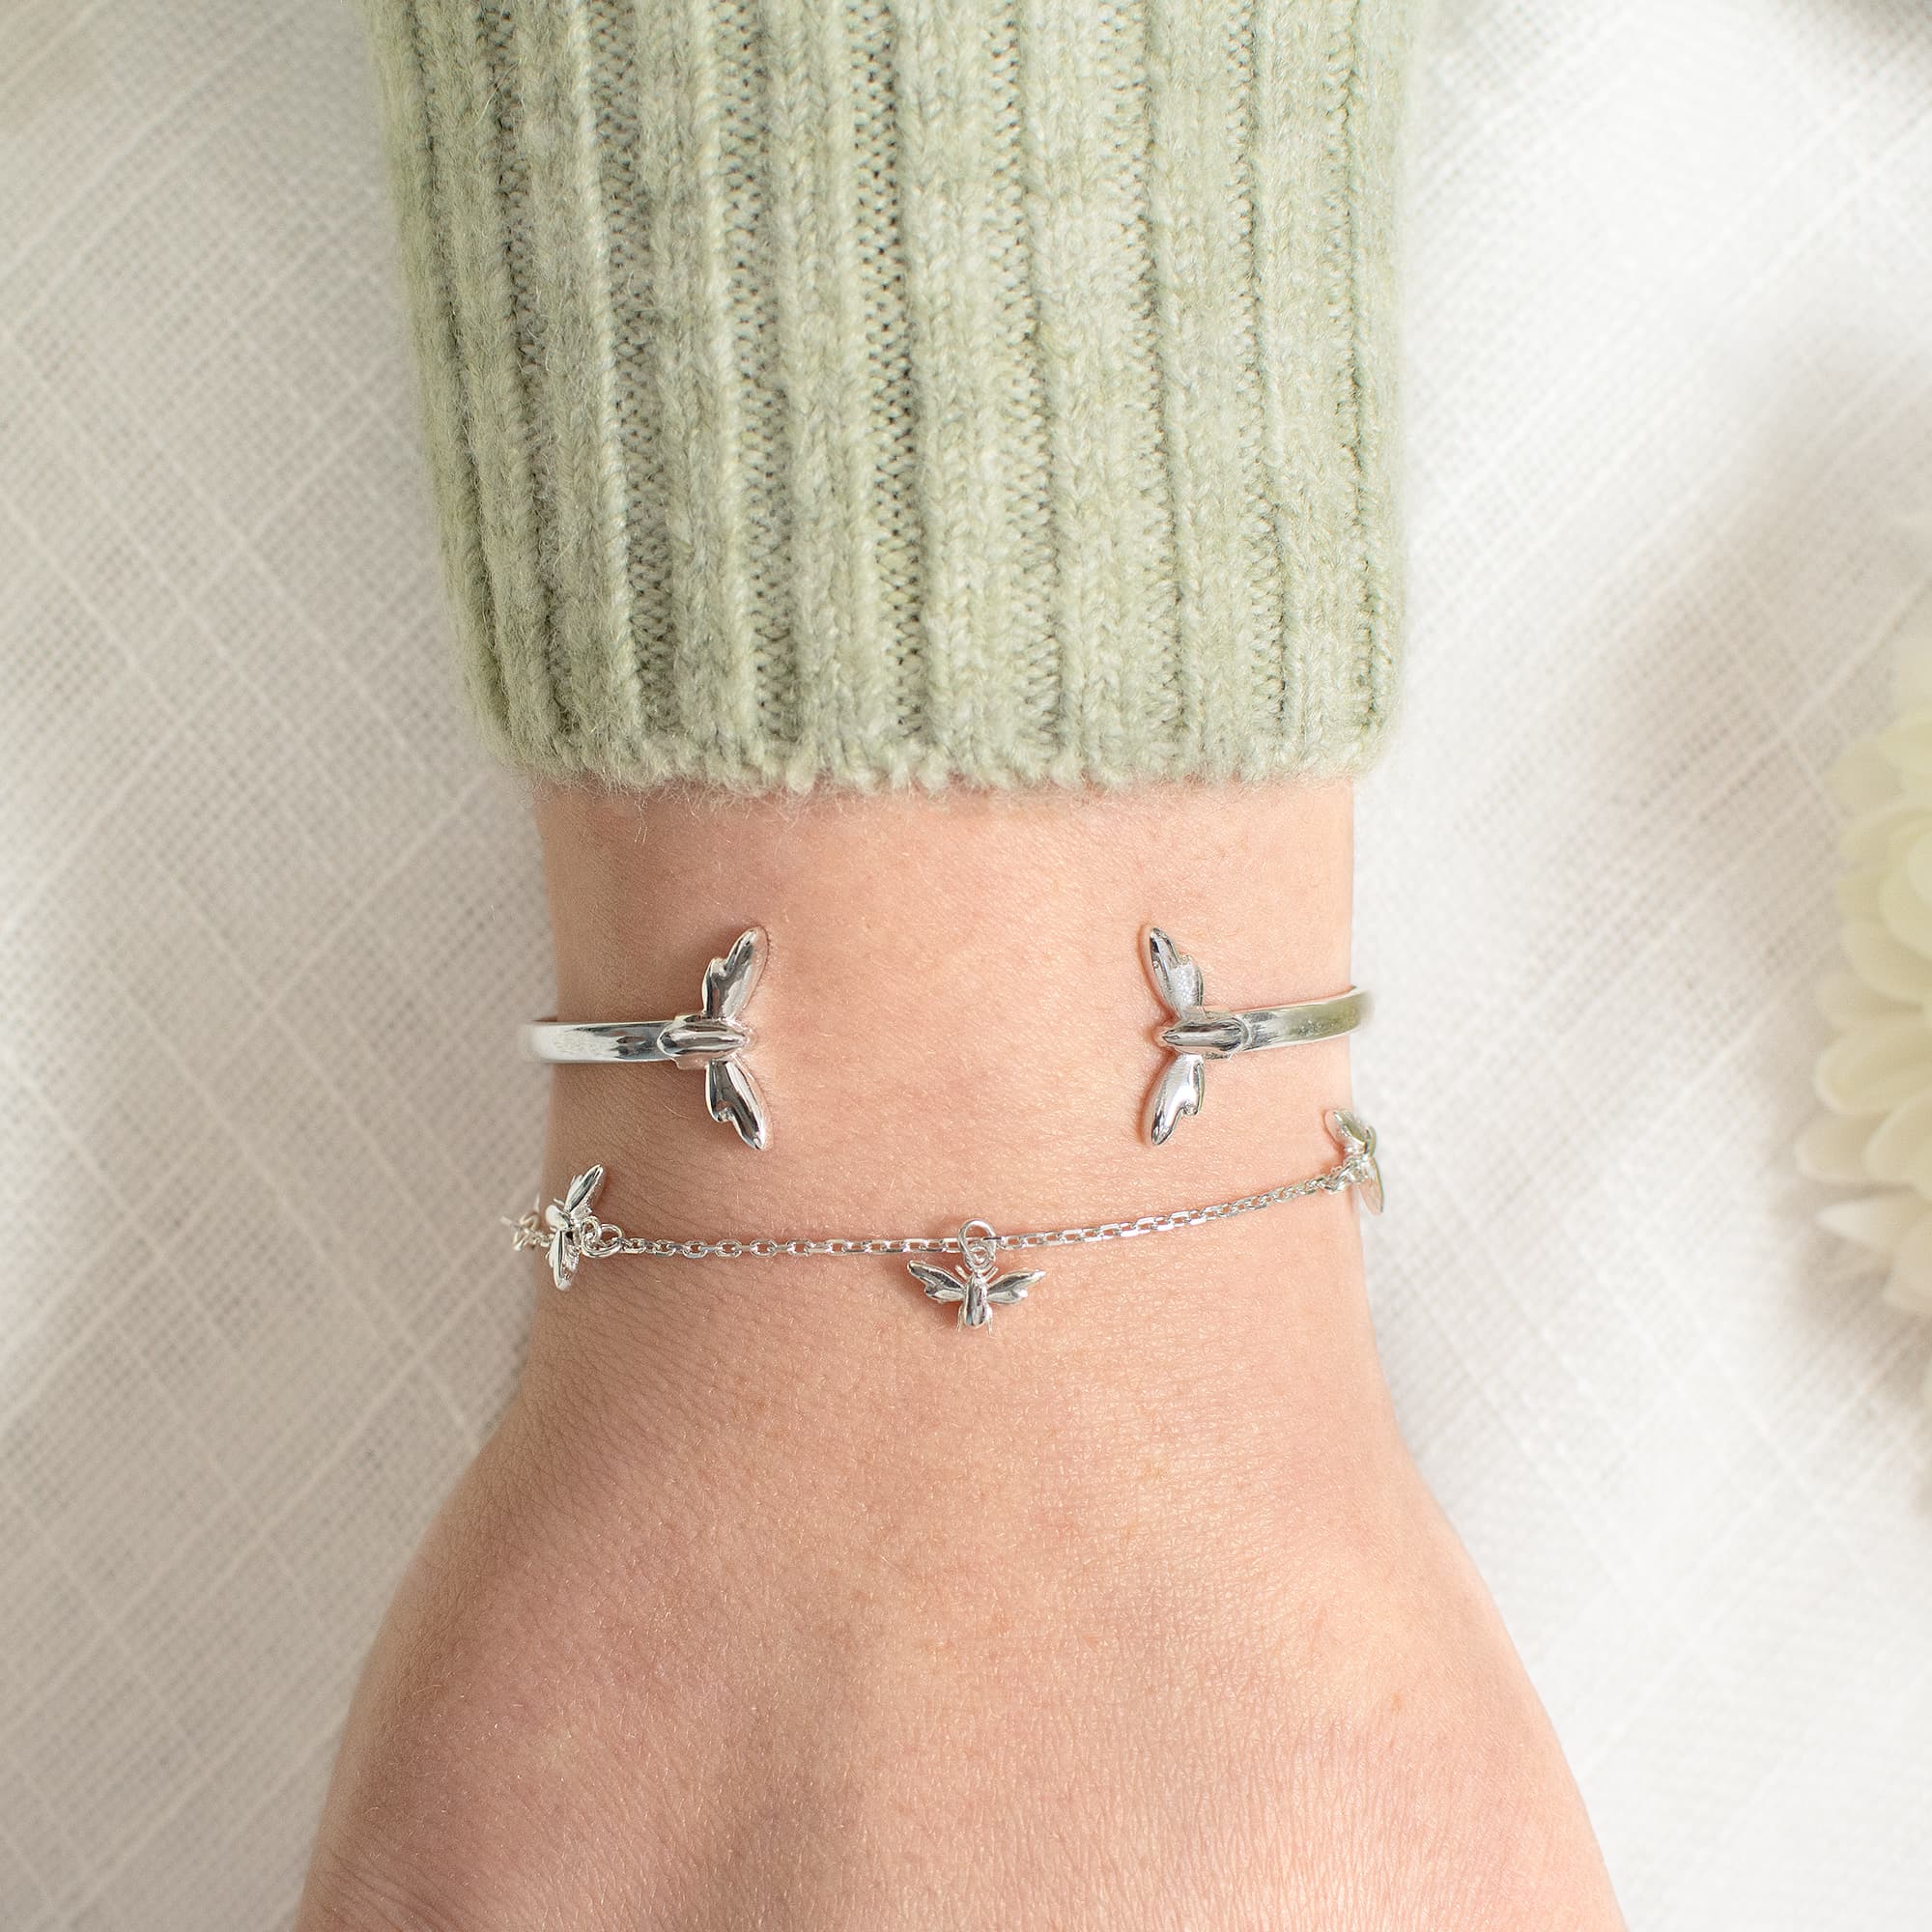 Bees Sterling Silver Bangle